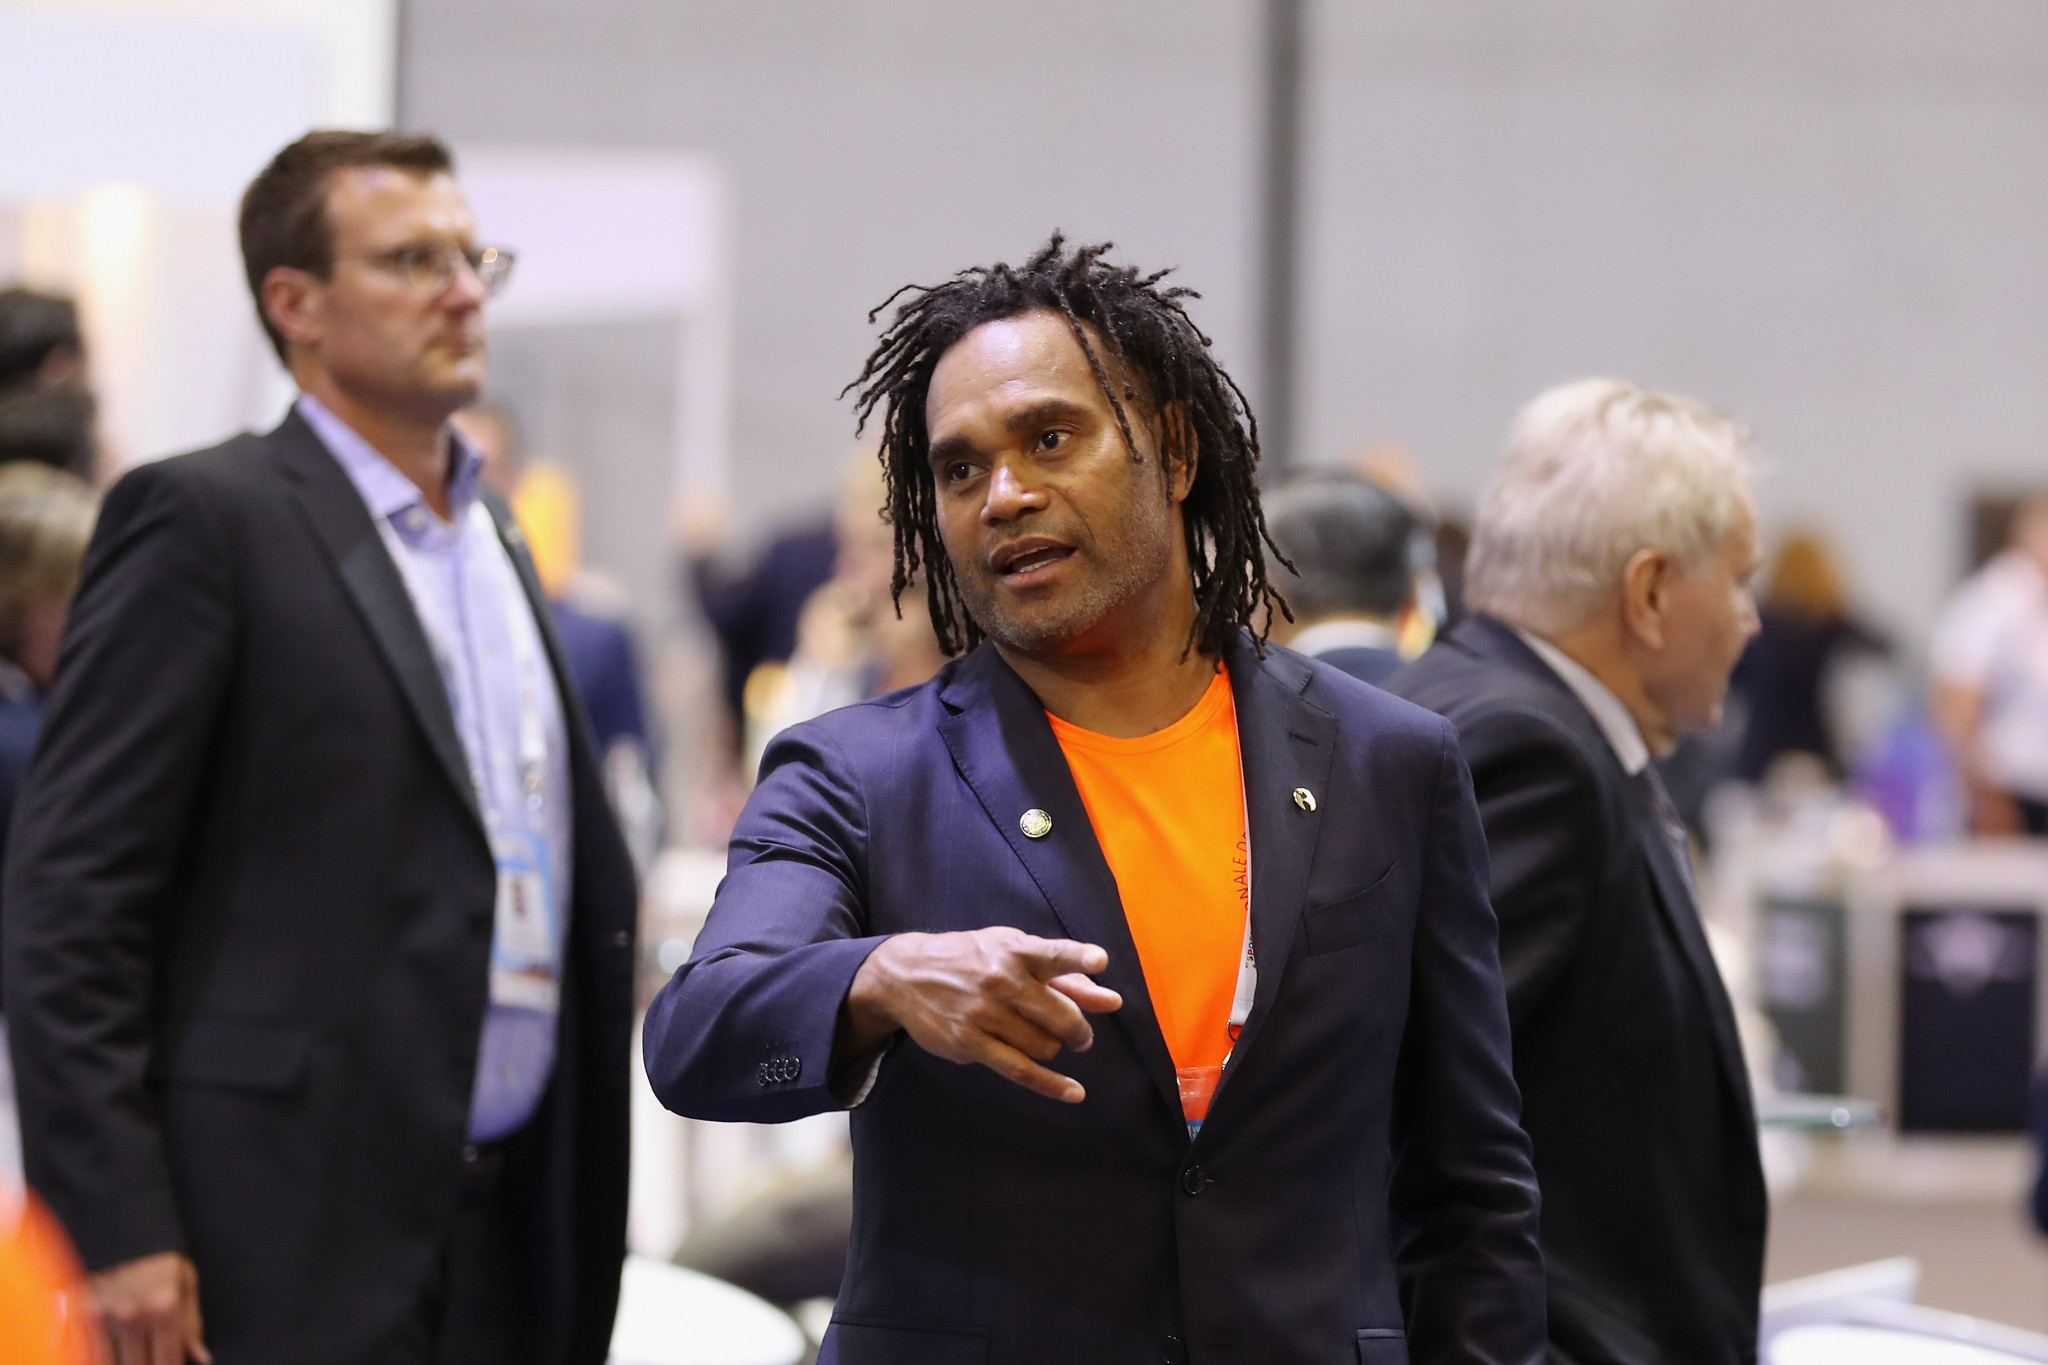  A number of past and present footballers have been attracted by teqball, including Christian Karembeu ©Getty Images